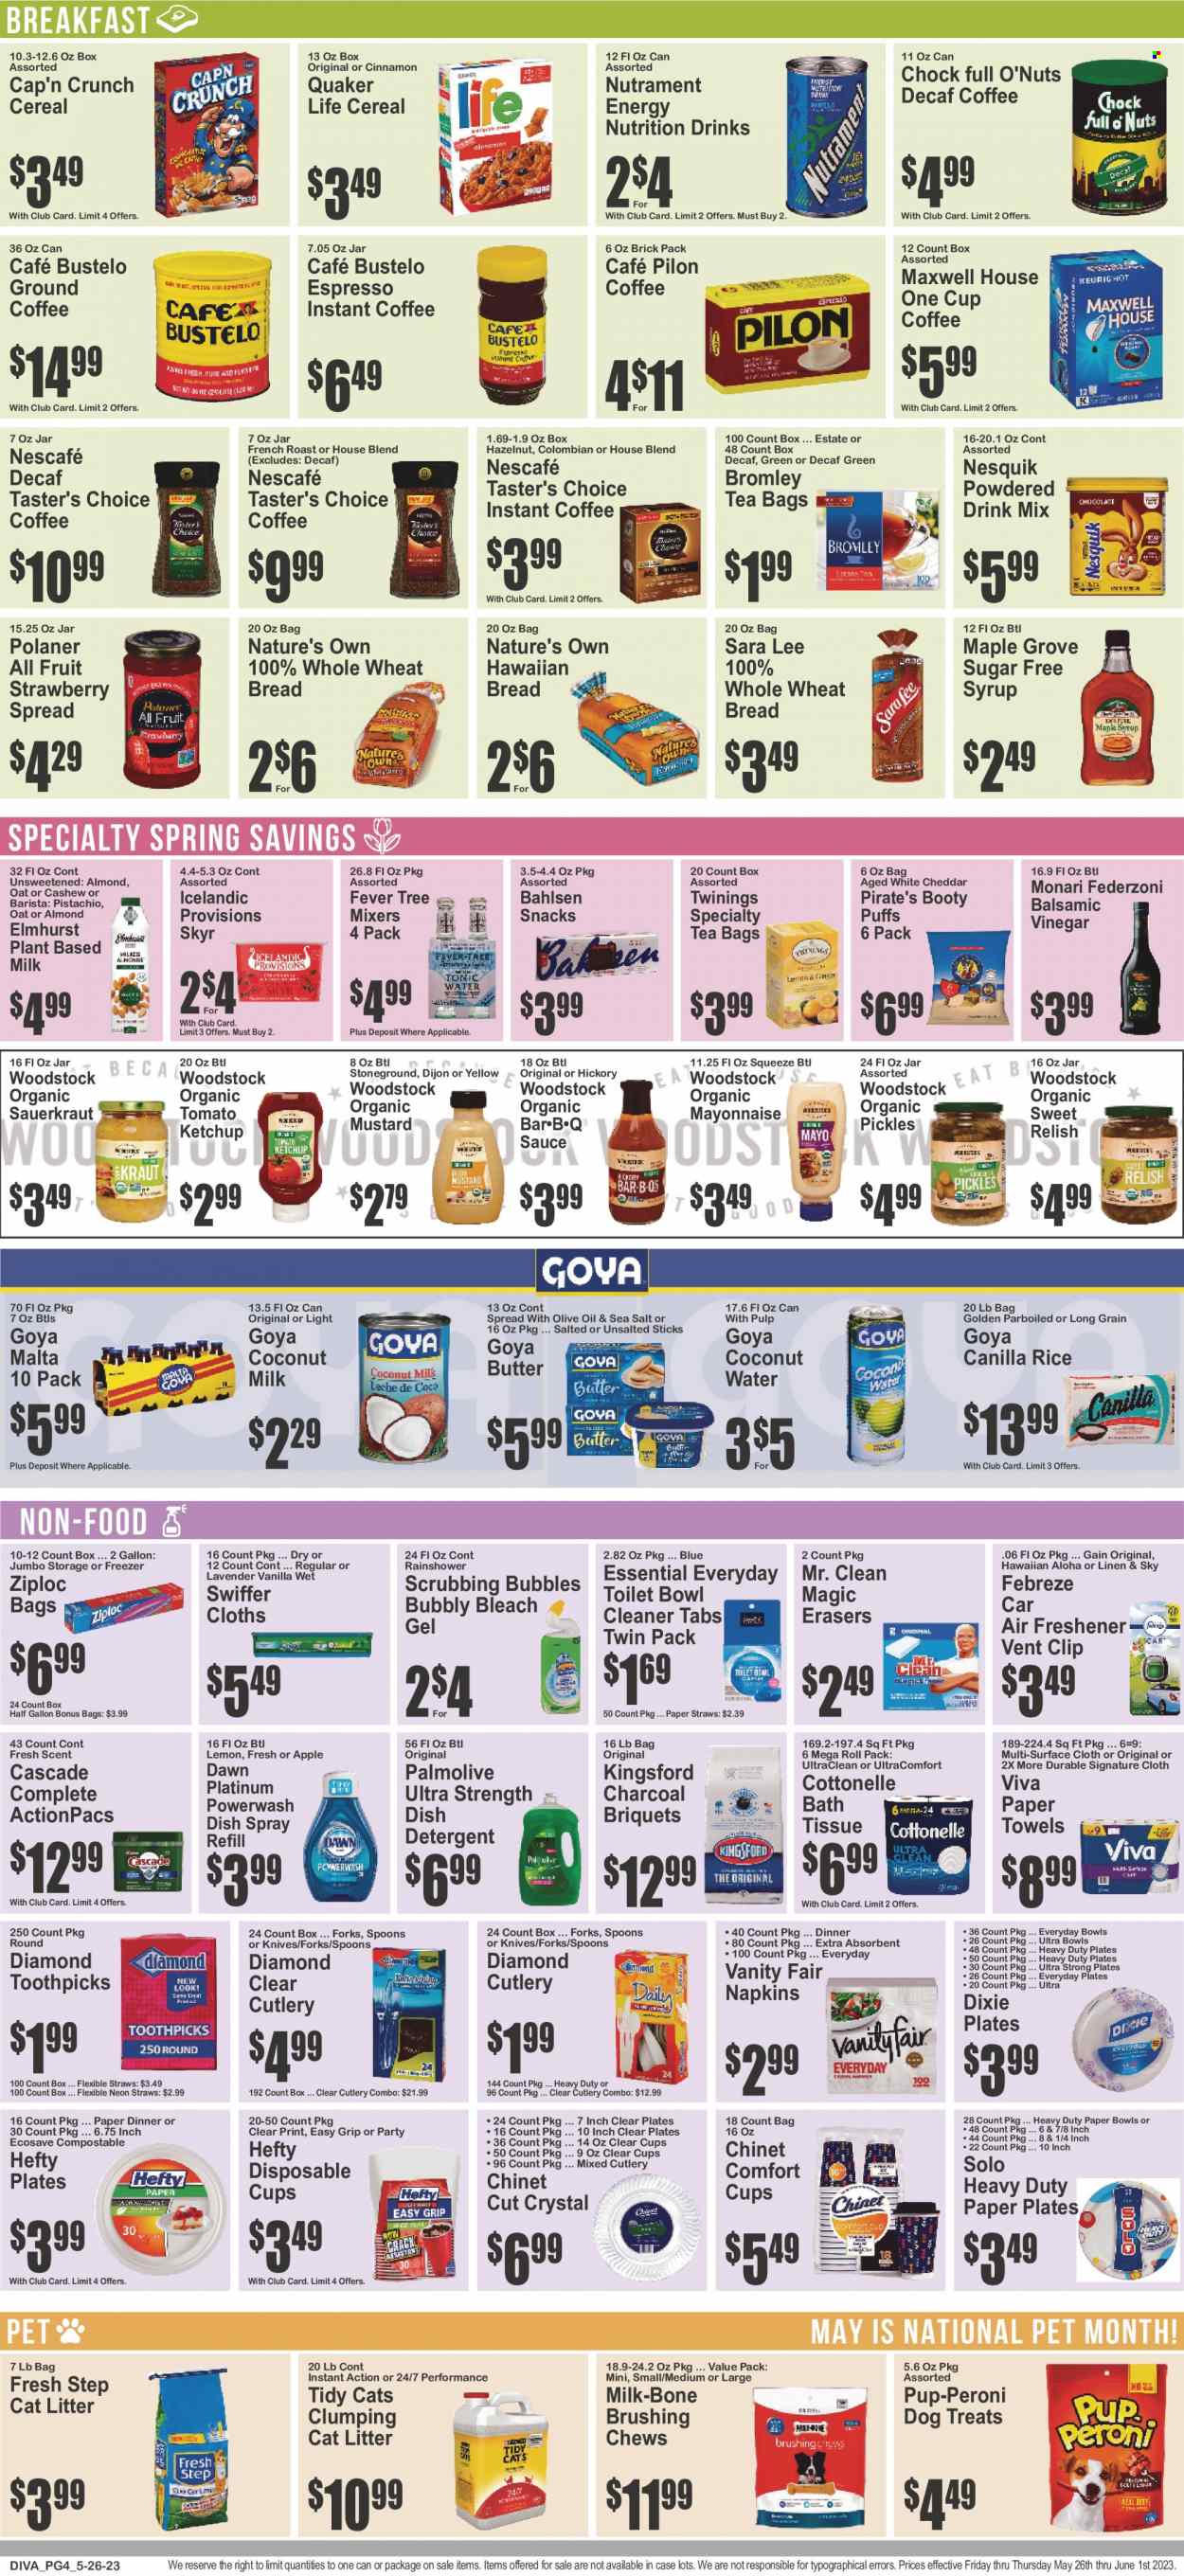 thumbnail - Food Dynasty Flyer - 05/26/2023 - 06/01/2023 - Sales products - wheat bread, Sara Lee, puffs, sauce, Quaker, Kingsford, roast, snack, cheddar, cheese, Nesquik, butter, mayonnaise, chewing gum, coconut milk, sauerkraut, pickles, Goya, pickled cabbage, cereals, Cap'n Crunch, rice, cinnamon, mustard, ketchup, balsamic vinegar, vinegar, syrup, coconut water, water, powder drink, Maxwell House, tea bags, Twinings, coffee, instant coffee, Nescafé, ground coffee, beer, napkins, bath tissue, Cottonelle, kitchen towels, paper towels, detergent, Febreze, Gain, Scrubbing Bubbles, cleaner, bleach, toilet cleaner, Swiffer, Cascade, dishwasher cleaner, Palmolive, Ziploc, Hefty, knife, spoon, plate, cup, straw, air freshener, paper plate, paper bowl, Dixie, cat litter, Pup-Peroni, Fresh Step, briquettes, charcoal, Nature's Own. Page 4.